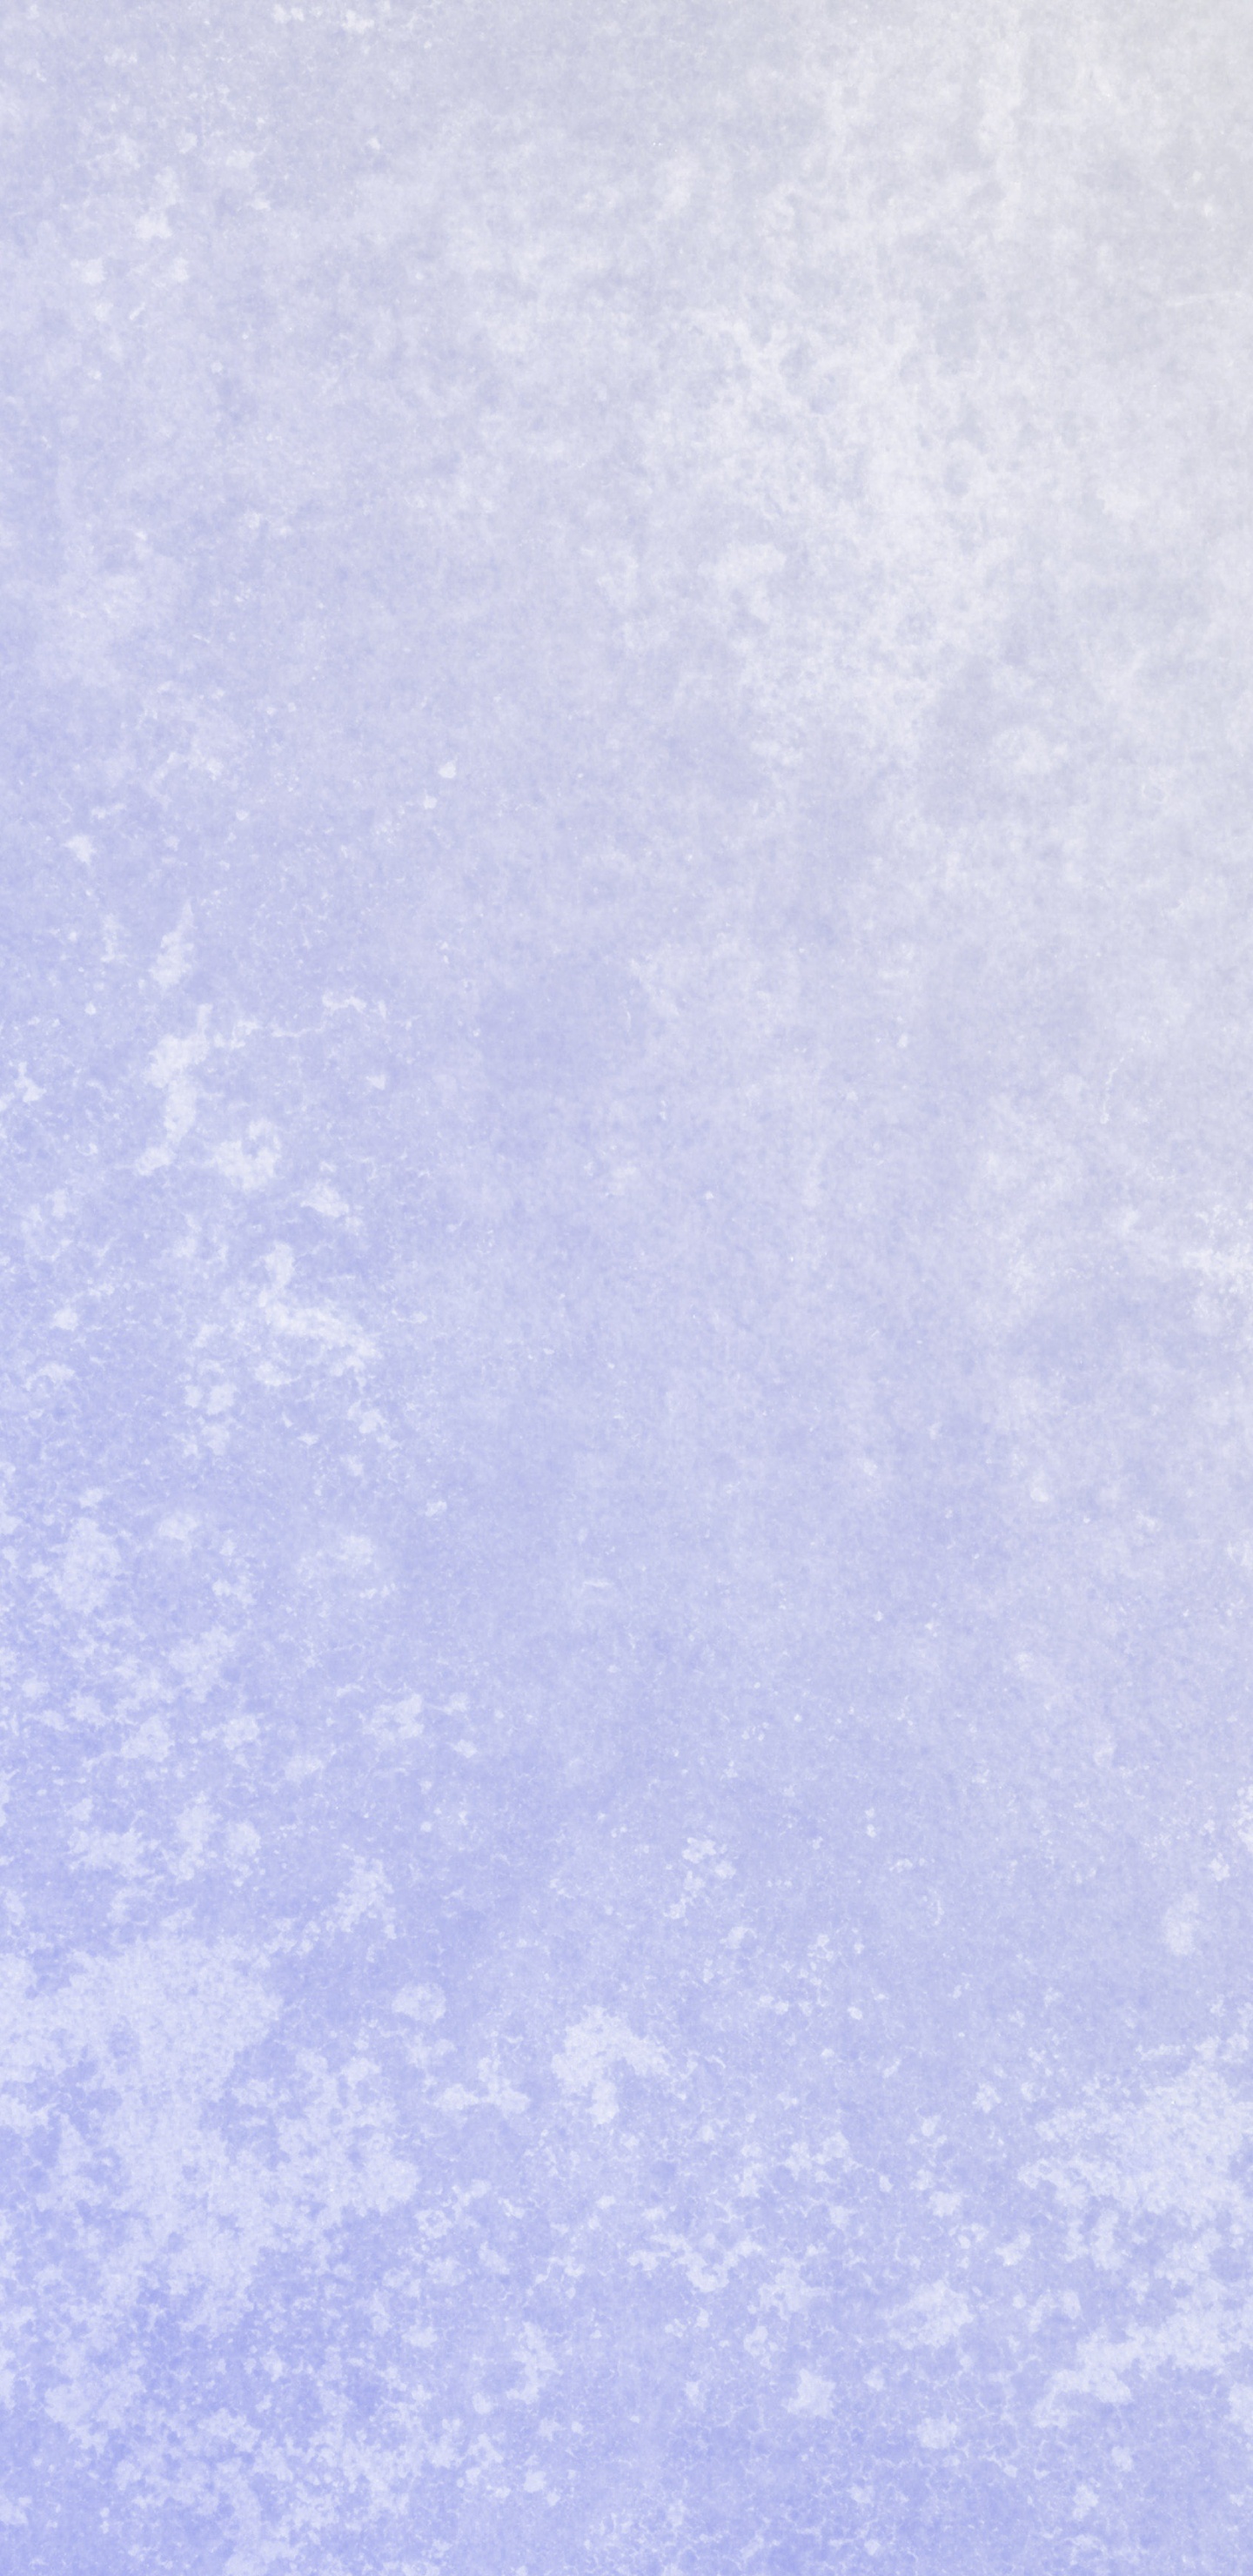 Blue Textile With White Paint. Wallpaper in 1440x2960 Resolution